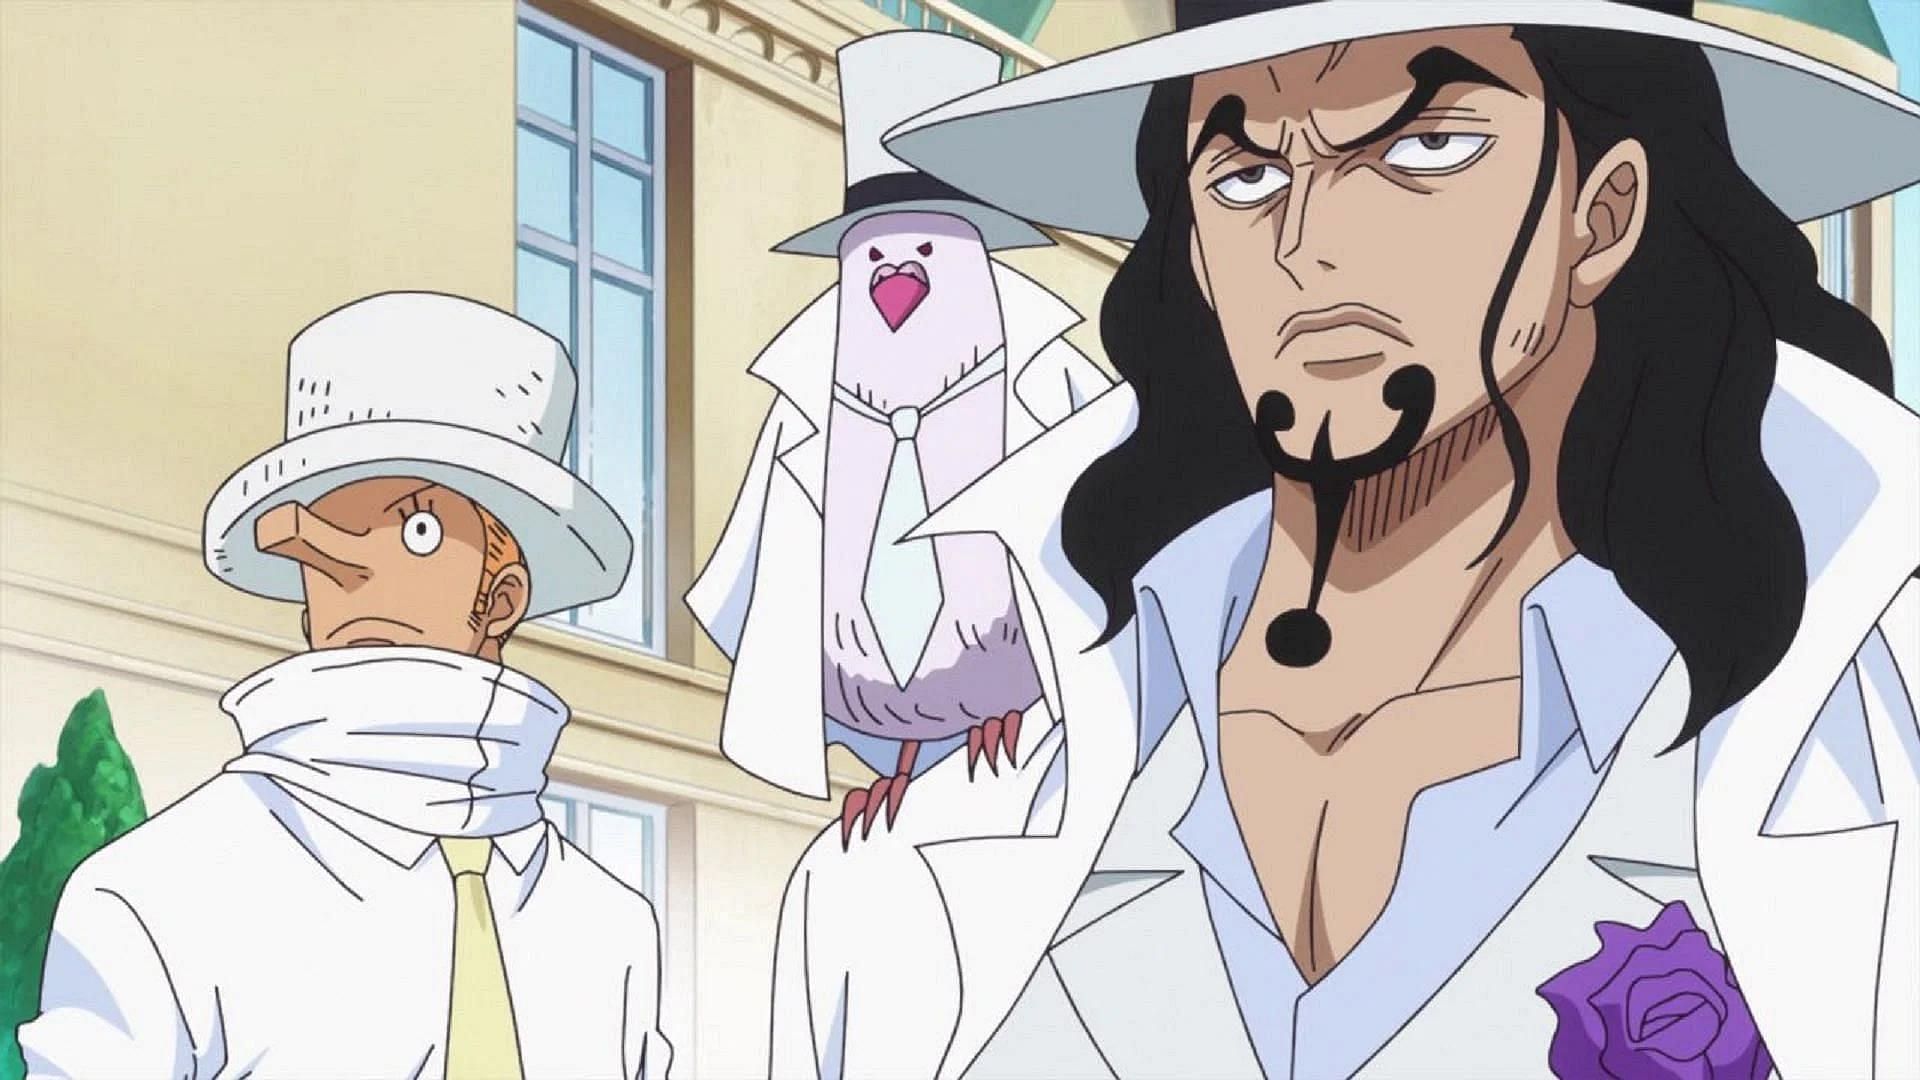 Lucci and Kaku seem set to team with Luffy and Zoro in One Piece episode 1109 (Image via Toei Animation)